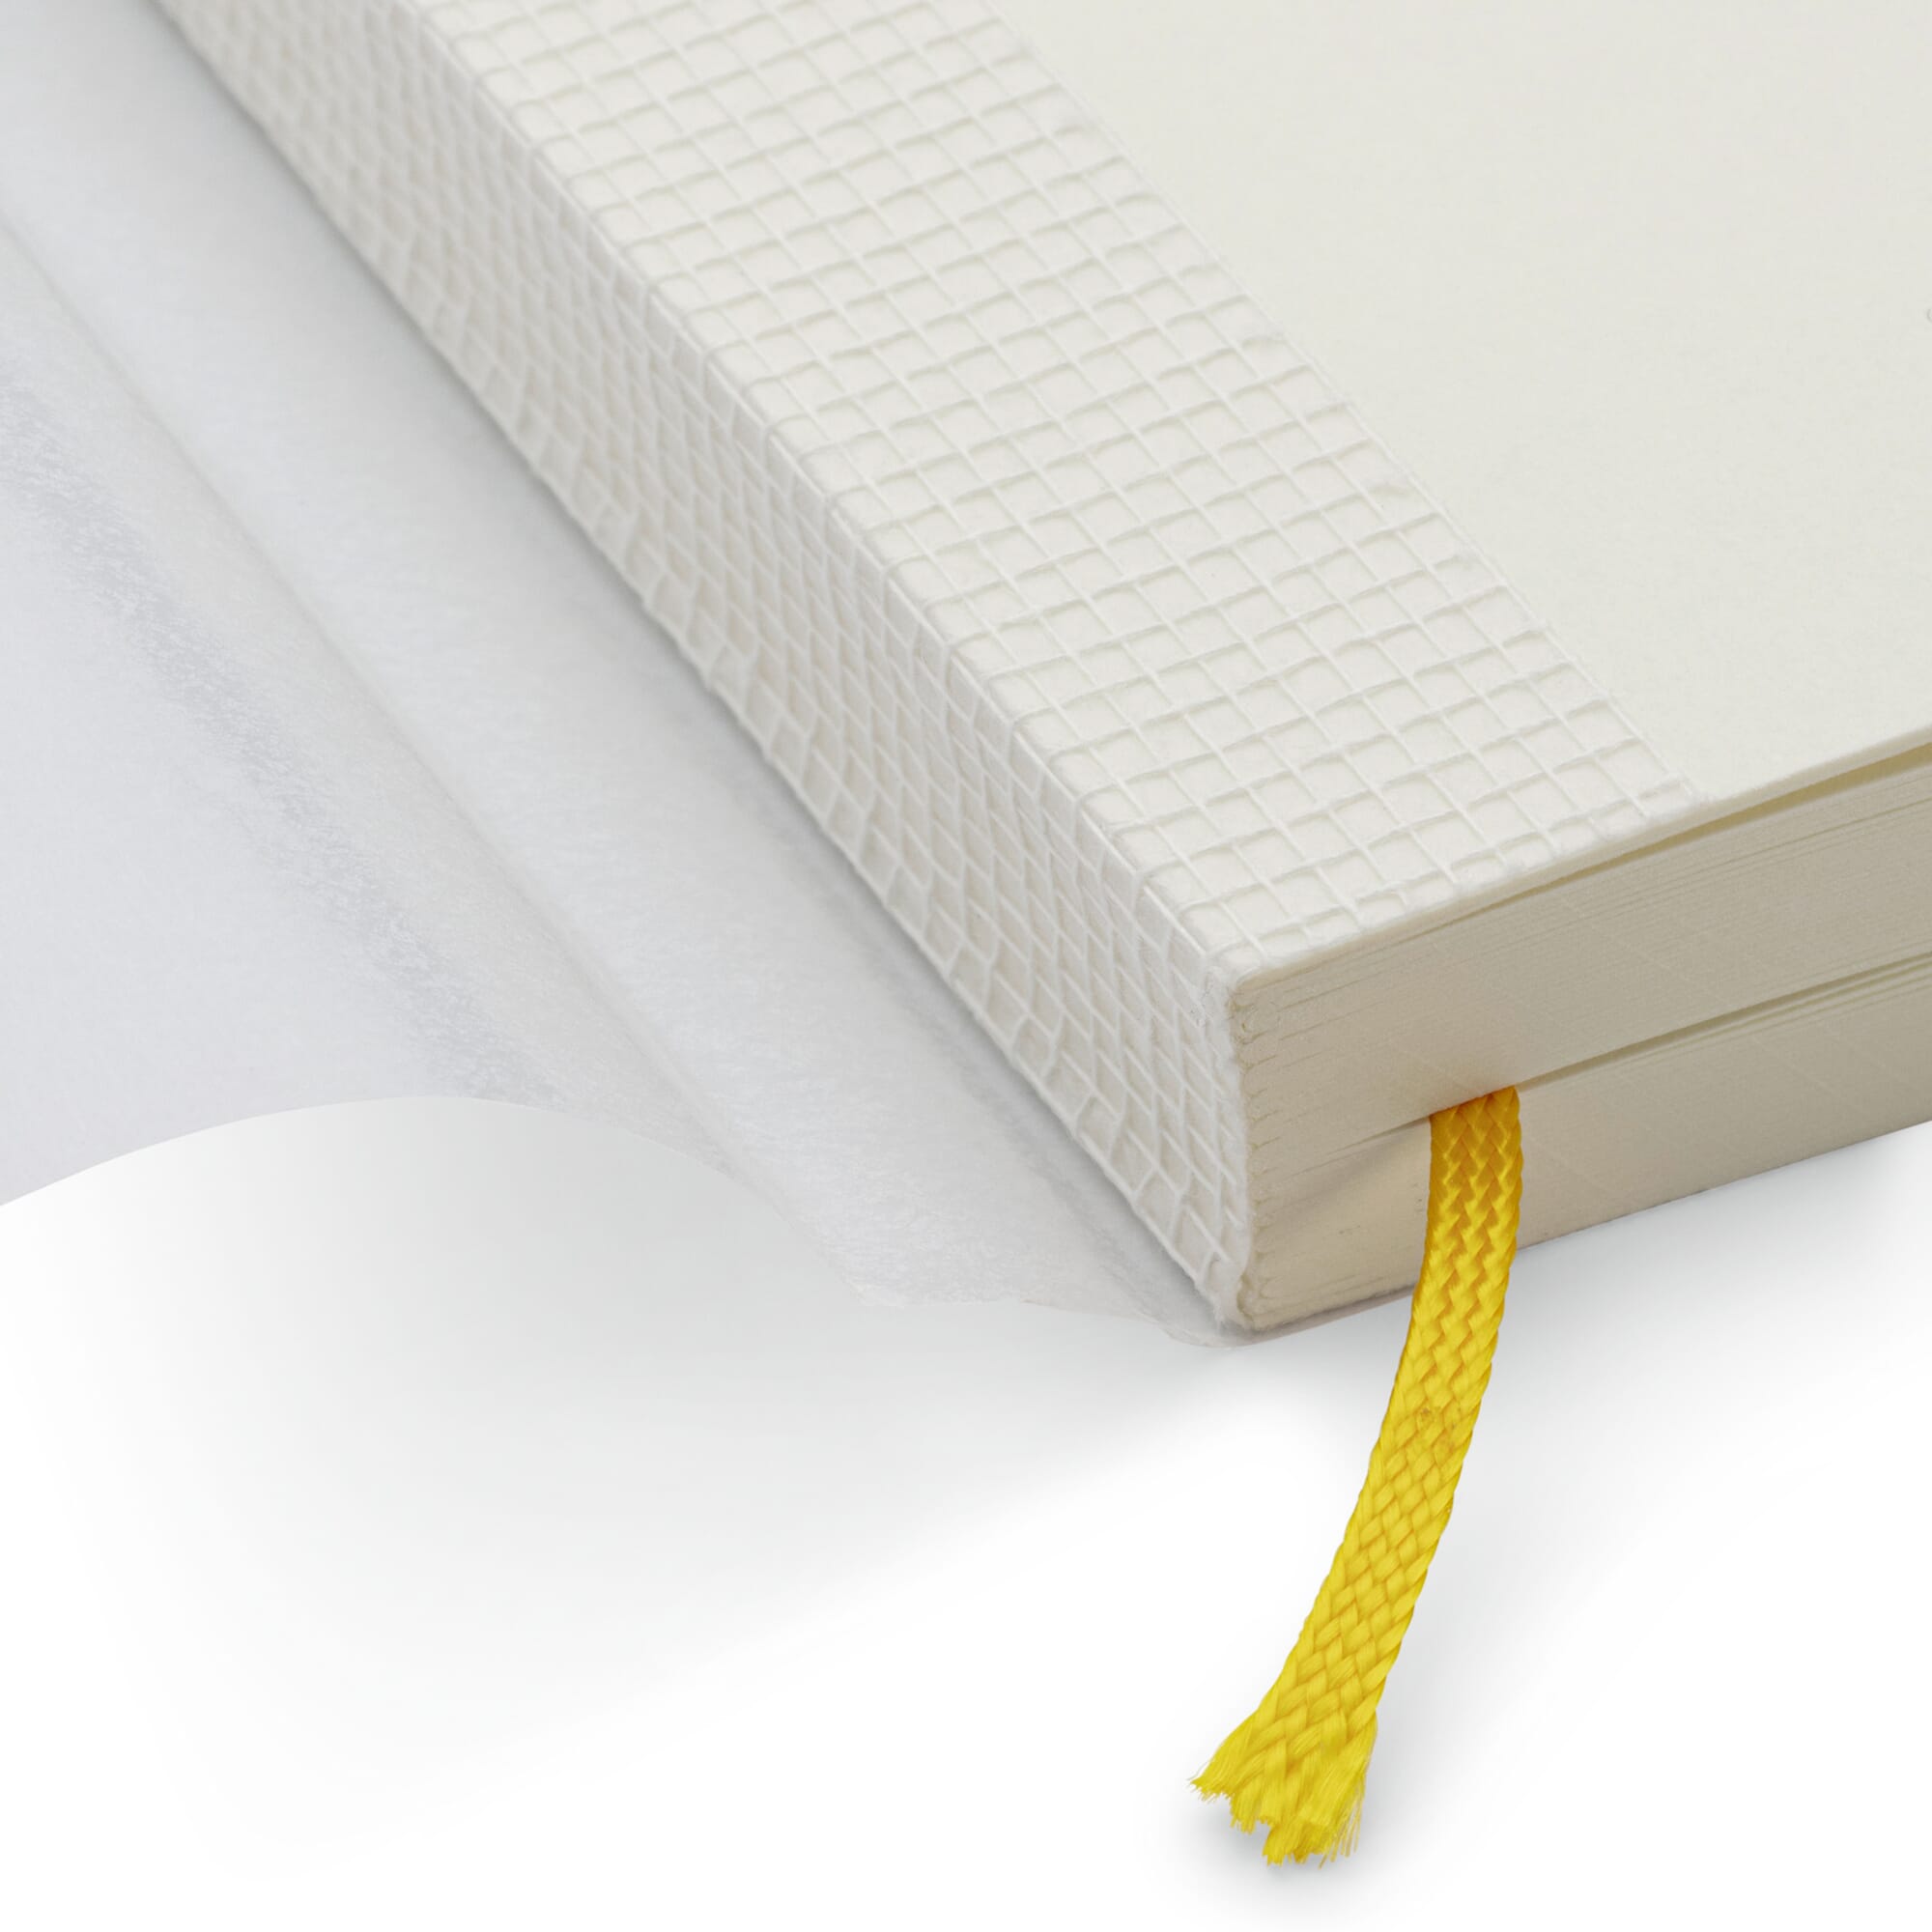 MD Notebook  MD PAPER PRODUCTS